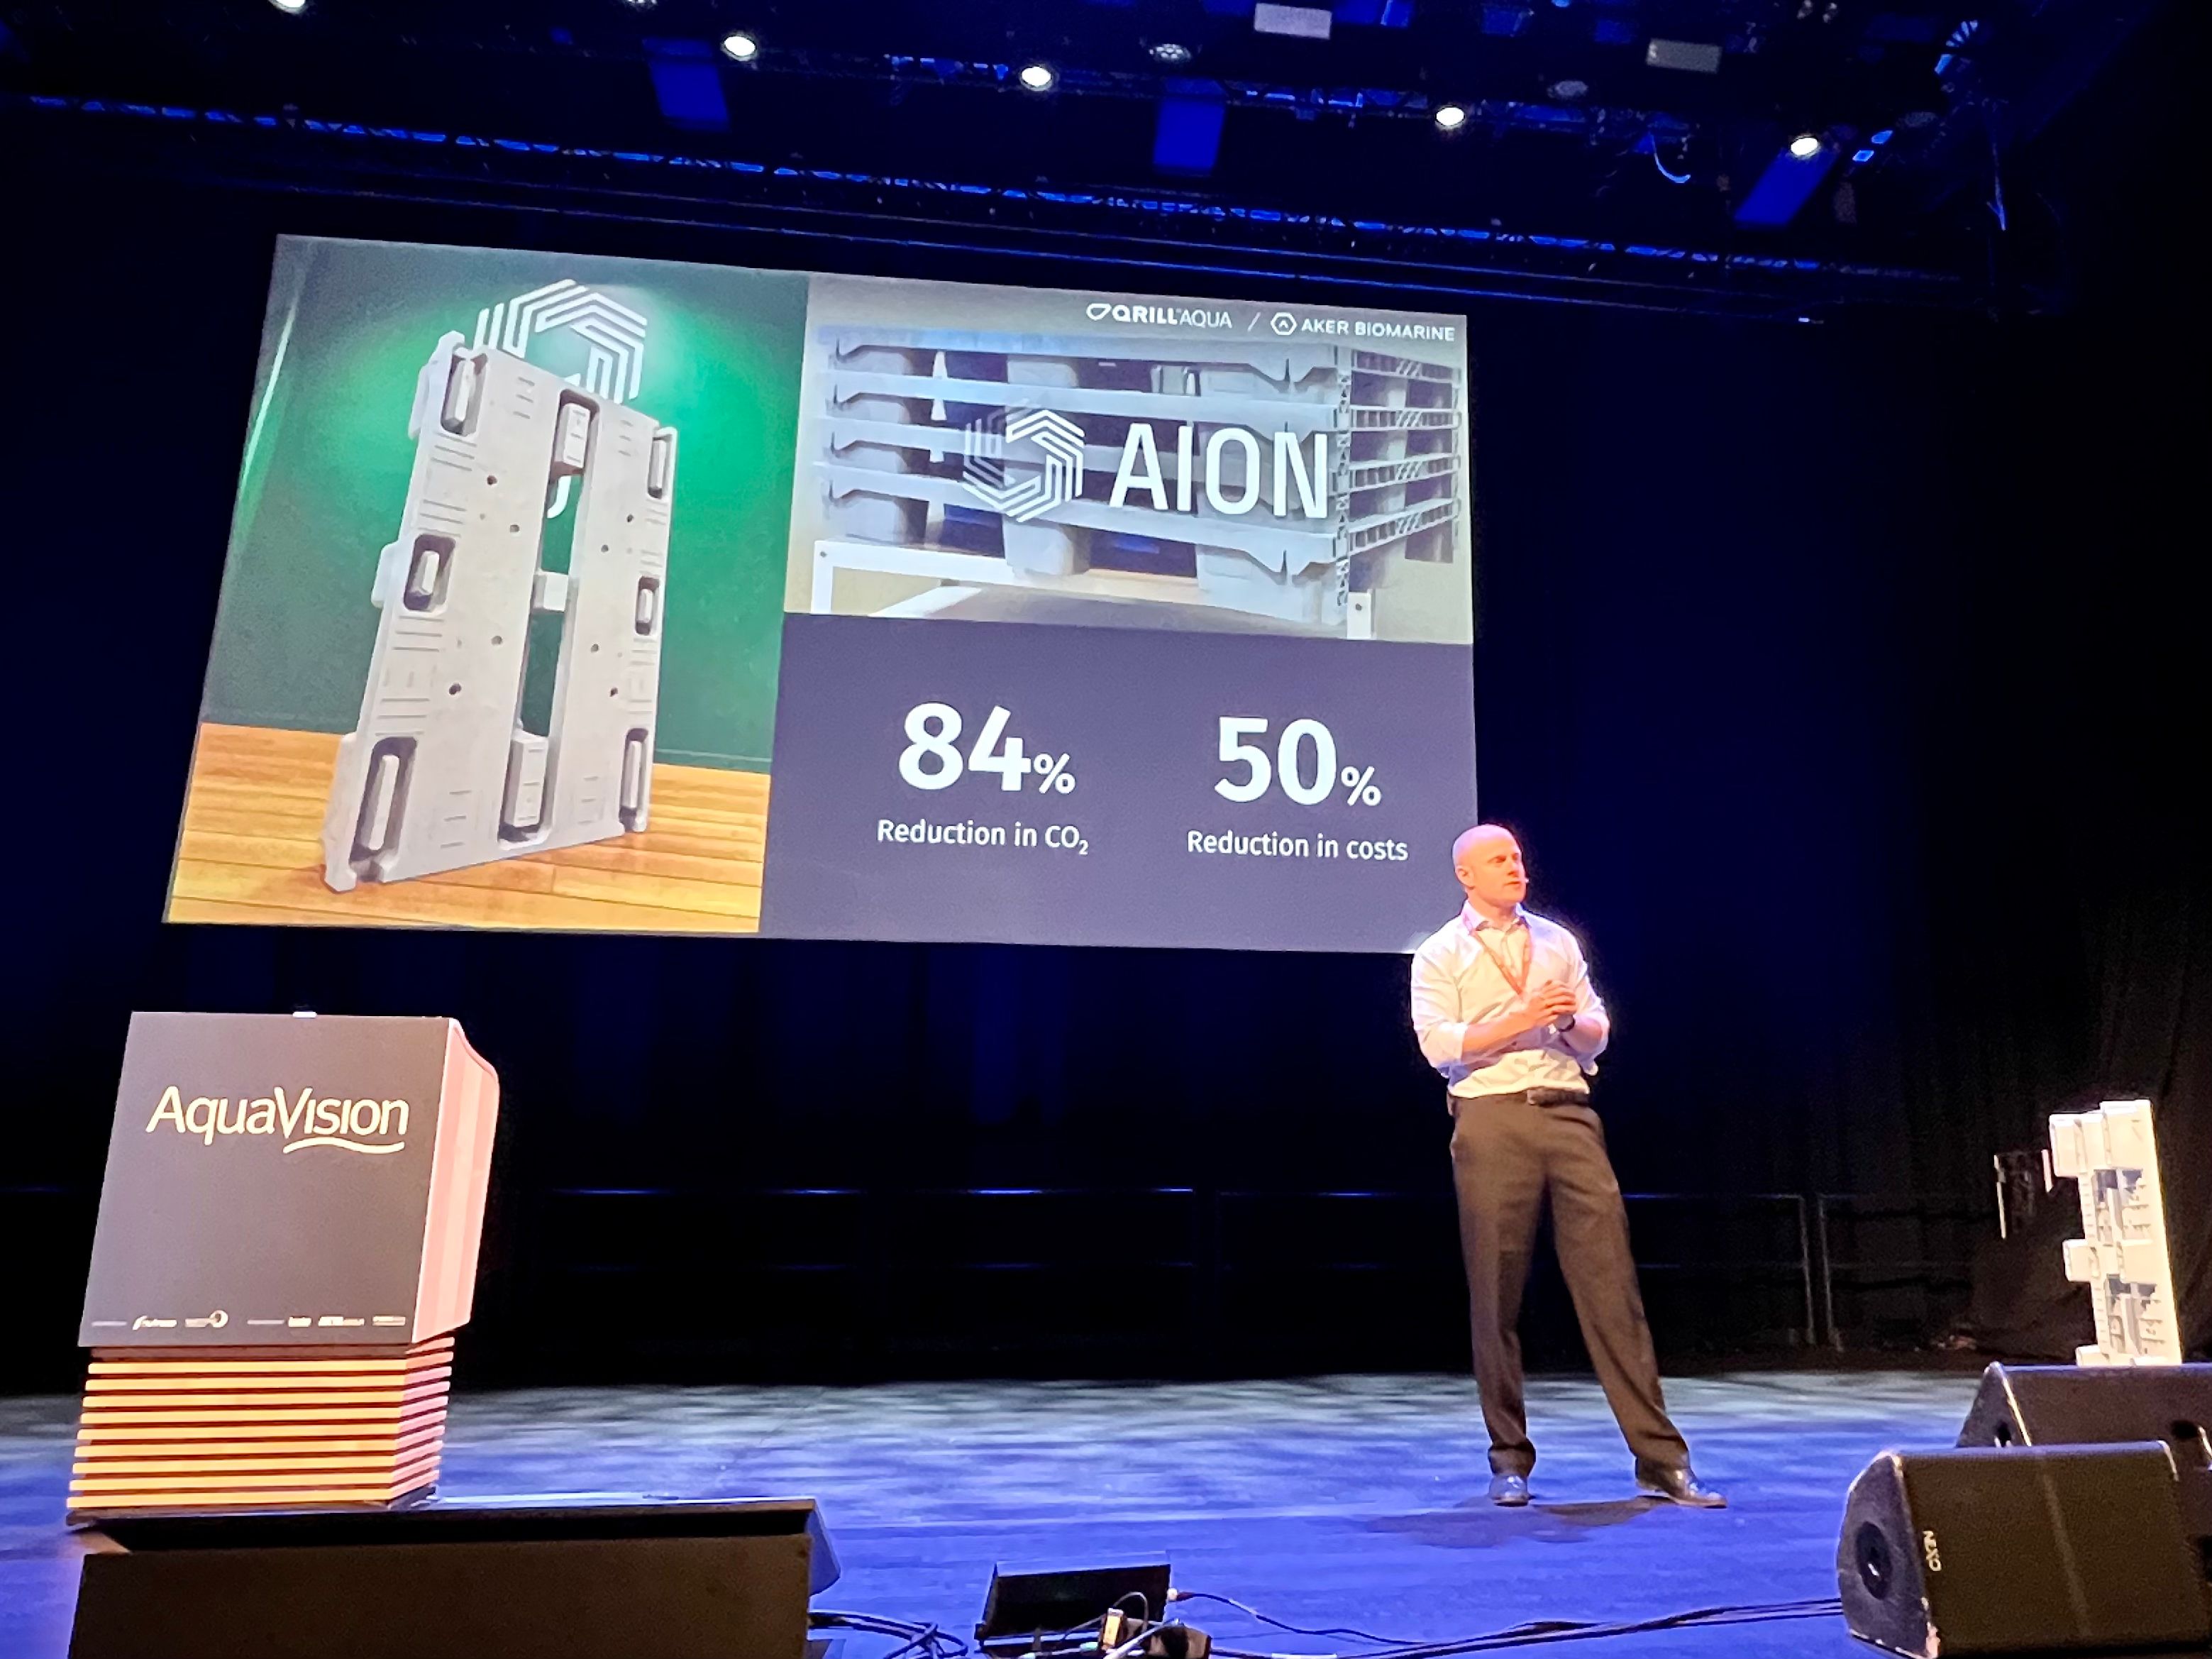 Matts Johansen, CEO of Aker BioMarine, presented the fully circular pallet at the AquaVision event by Nutreco